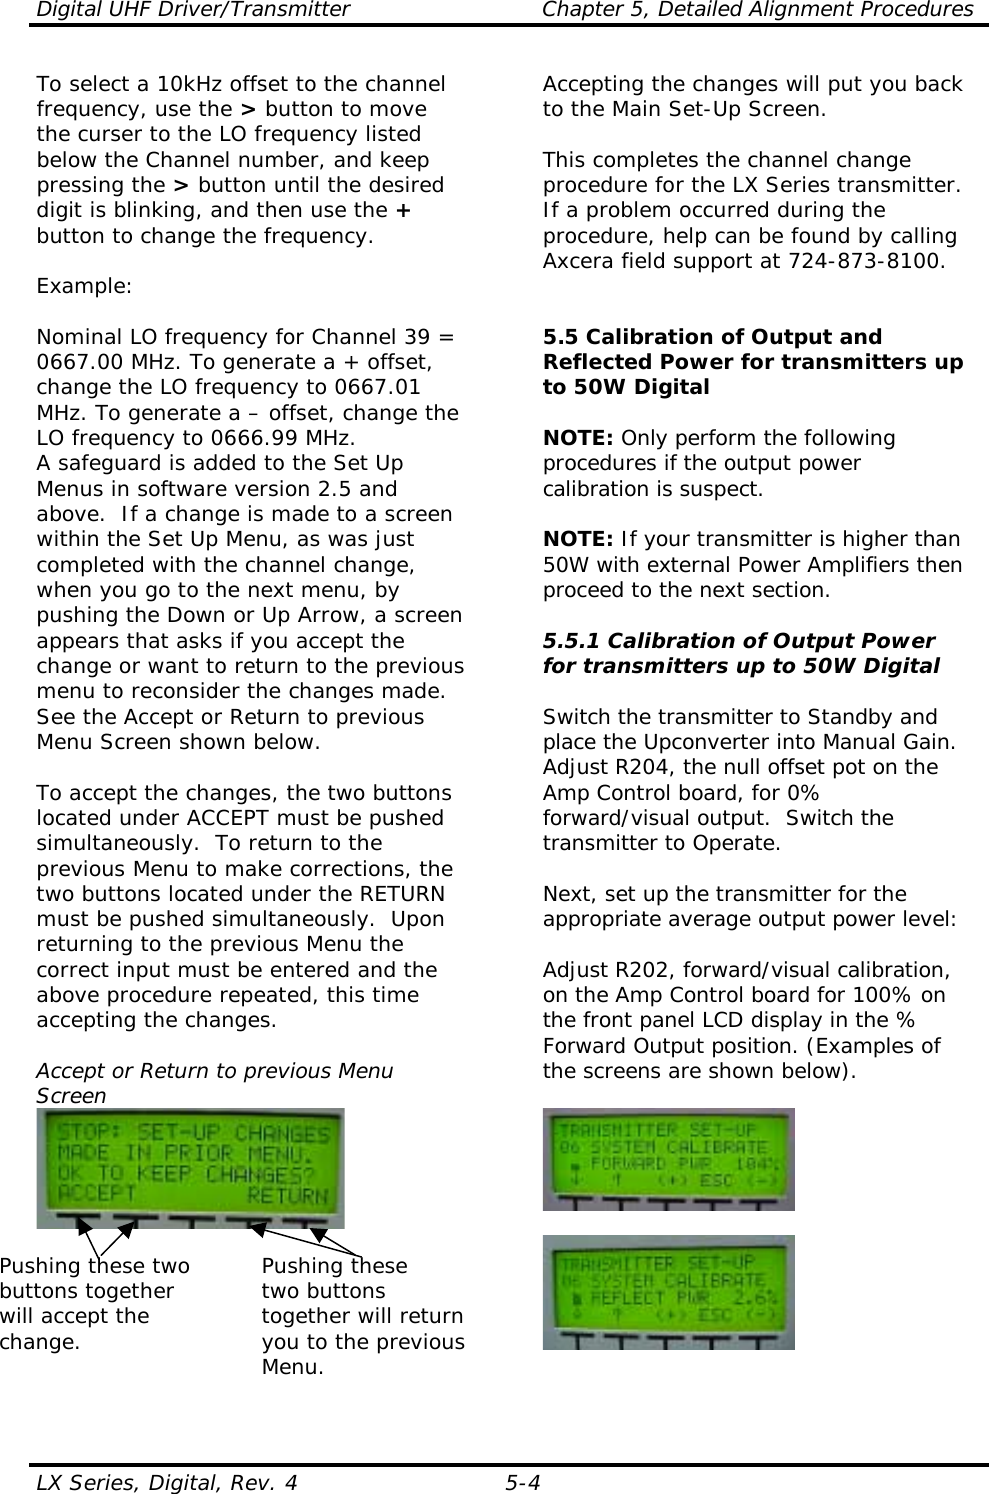 Digital UHF Driver/Transmitter  Chapter 5, Detailed Alignment Procedures  LX Series, Digital, Rev. 4  5-4 To select a 10kHz offset to the channel frequency, use the &gt; button to move the curser to the LO frequency listed below the Channel number, and keep pressing the &gt; button until the desired digit is blinking, and then use the + button to change the frequency.   Example:  Nominal LO frequency for Channel 39 = 0667.00 MHz. To generate a + offset, change the LO frequency to 0667.01 MHz. To generate a – offset, change the LO frequency to 0666.99 MHz. A safeguard is added to the Set Up Menus in software version 2.5 and above.  If a change is made to a screen within the Set Up Menu, as was just completed with the channel change, when you go to the next menu, by pushing the Down or Up Arrow, a screen appears that asks if you accept the change or want to return to the previous menu to reconsider the changes made.  See the Accept or Return to previous Menu Screen shown below.  To accept the changes, the two buttons located under ACCEPT must be pushed simultaneously.  To return to the previous Menu to make corrections, the two buttons located under the RETURN must be pushed simultaneously.  Upon returning to the previous Menu the correct input must be entered and the above procedure repeated, this time accepting the changes.  Accept or Return to previous Menu Screen   Pushing these two  Pushing these buttons together    two buttons  will accept the    together will return change.  you to the previous Menu.  Accepting the changes will put you back to the Main Set-Up Screen.  This completes the channel change procedure for the LX Series transmitter.  If a problem occurred during the procedure, help can be found by calling Axcera field support at 724-873-8100.   5.5 Calibration of Output and Reflected Power for transmitters up to 50W Digital  NOTE: Only perform the following procedures if the output power calibration is suspect.  NOTE: If your transmitter is higher than 50W with external Power Amplifiers then proceed to the next section.  5.5.1 Calibration of Output Power for transmitters up to 50W Digital  Switch the transmitter to Standby and place the Upconverter into Manual Gain.  Adjust R204, the null offset pot on the Amp Control board, for 0% forward/visual output.  Switch the transmitter to Operate.  Next, set up the transmitter for the appropriate average output power level:  Adjust R202, forward/visual calibration, on the Amp Control board for 100% on the front panel LCD display in the % Forward Output position. (Examples of the screens are shown below).     